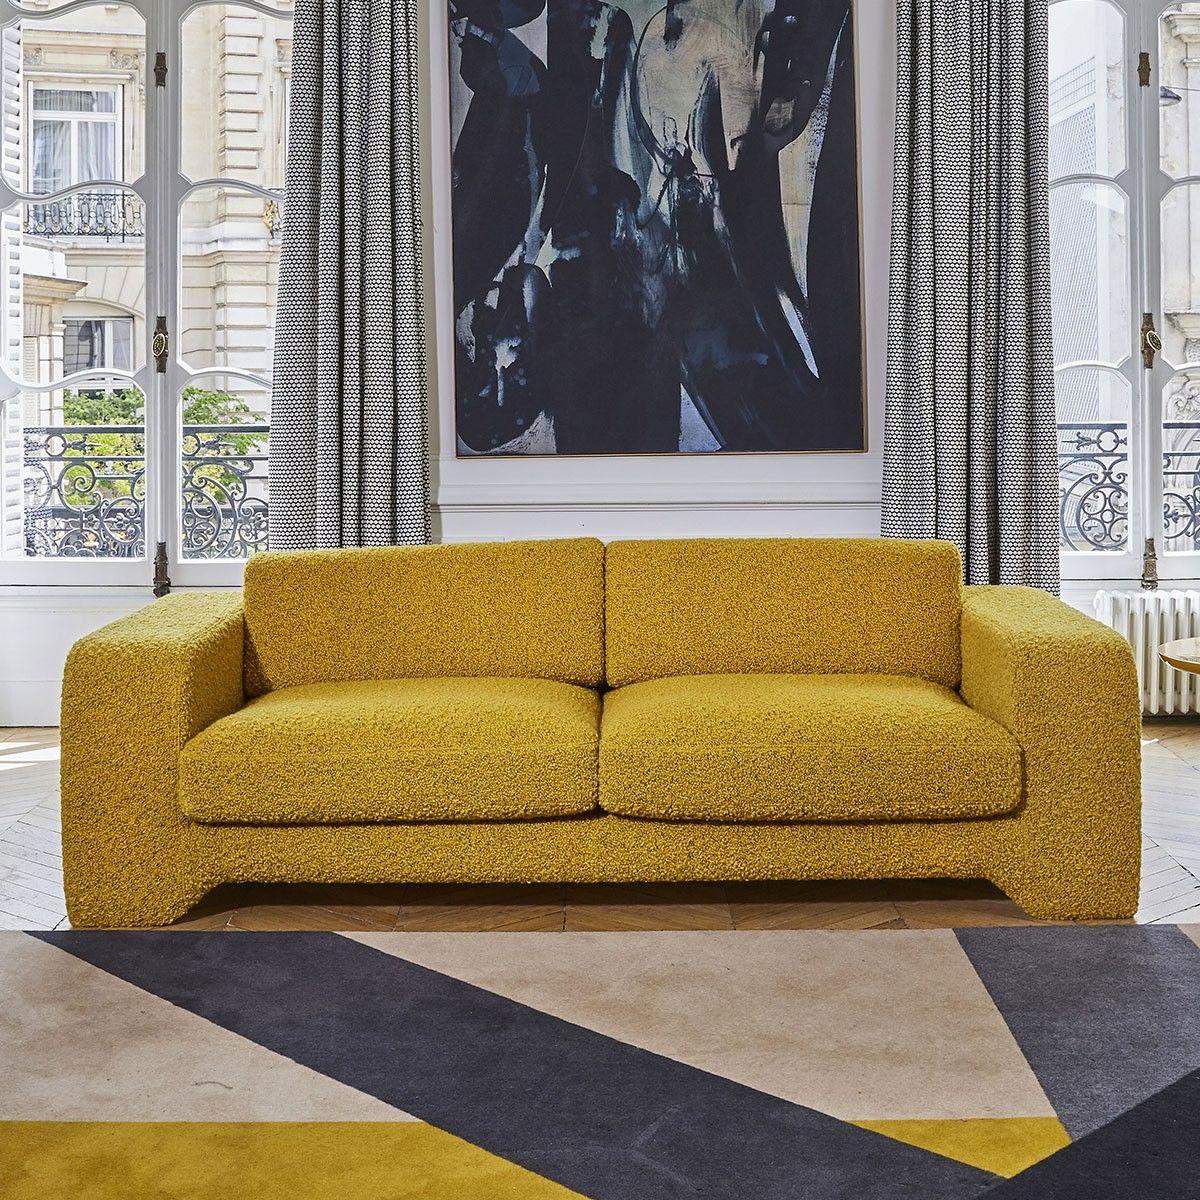 Popus Editions Giovanna 3 Seater Sofa in Green (771727) Como Velvet Upholstery

Giovanna is a sofa with a strong profile. A sober, plush line, with this famous detail that changes everything, so as not to forget its strength of character and this